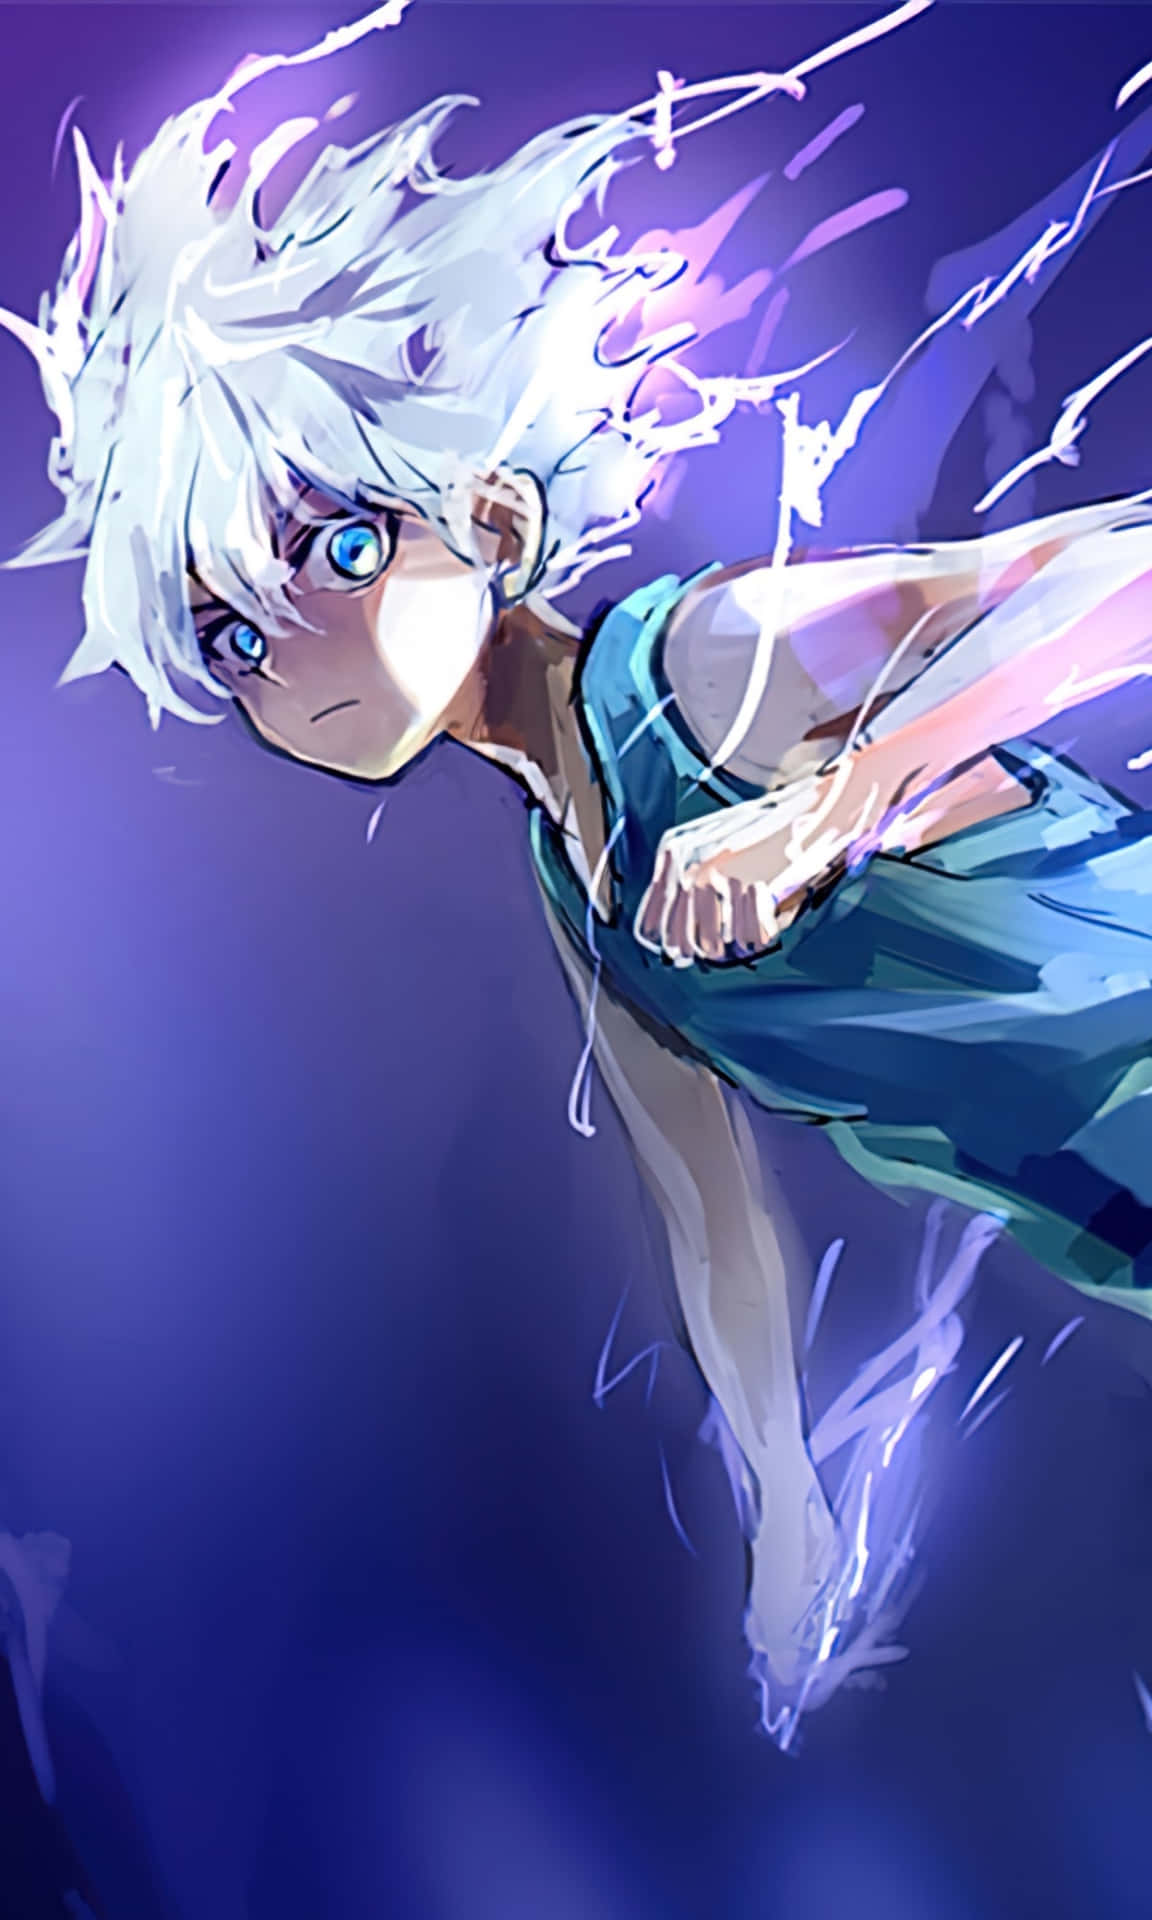 A Boy With White Hair Flying Through The Air Wallpaper